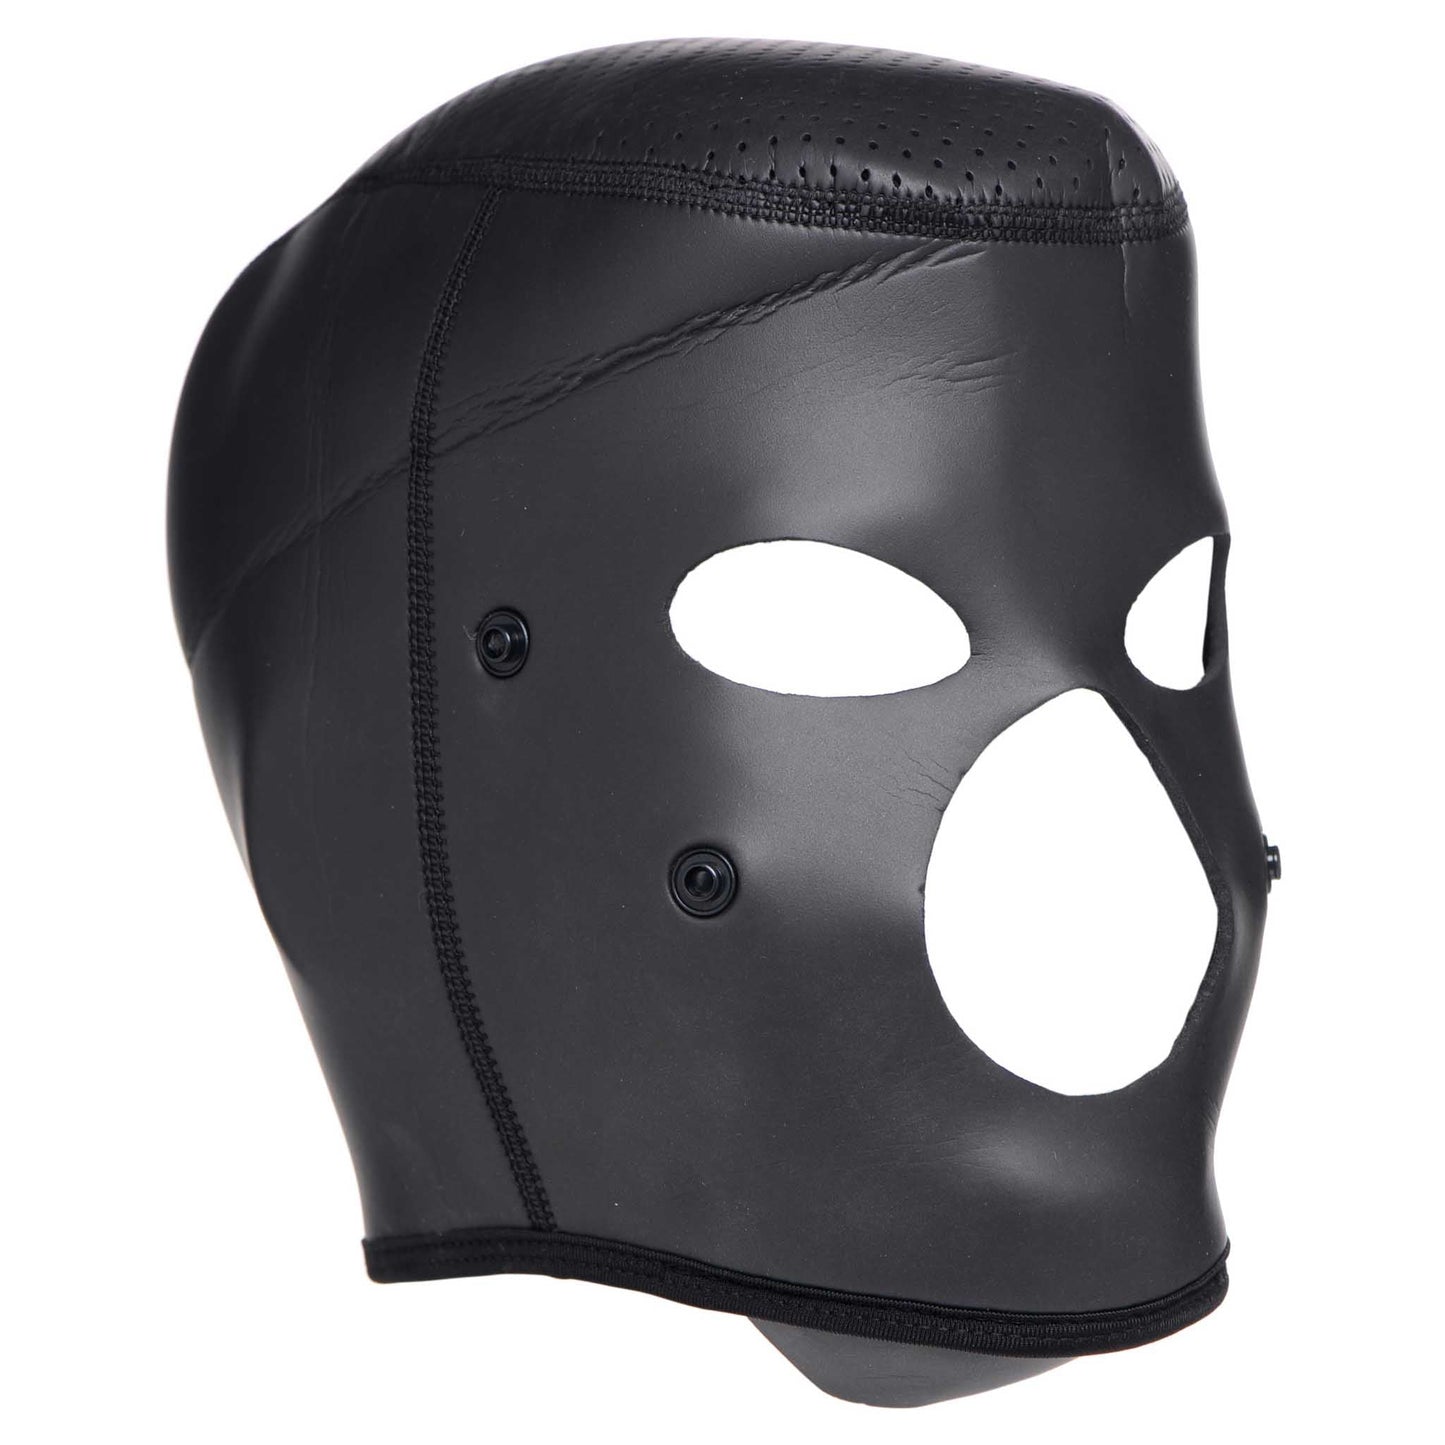 Master Series Scorpion Hood with Removable Blindfold and Face Mask - Black/Red